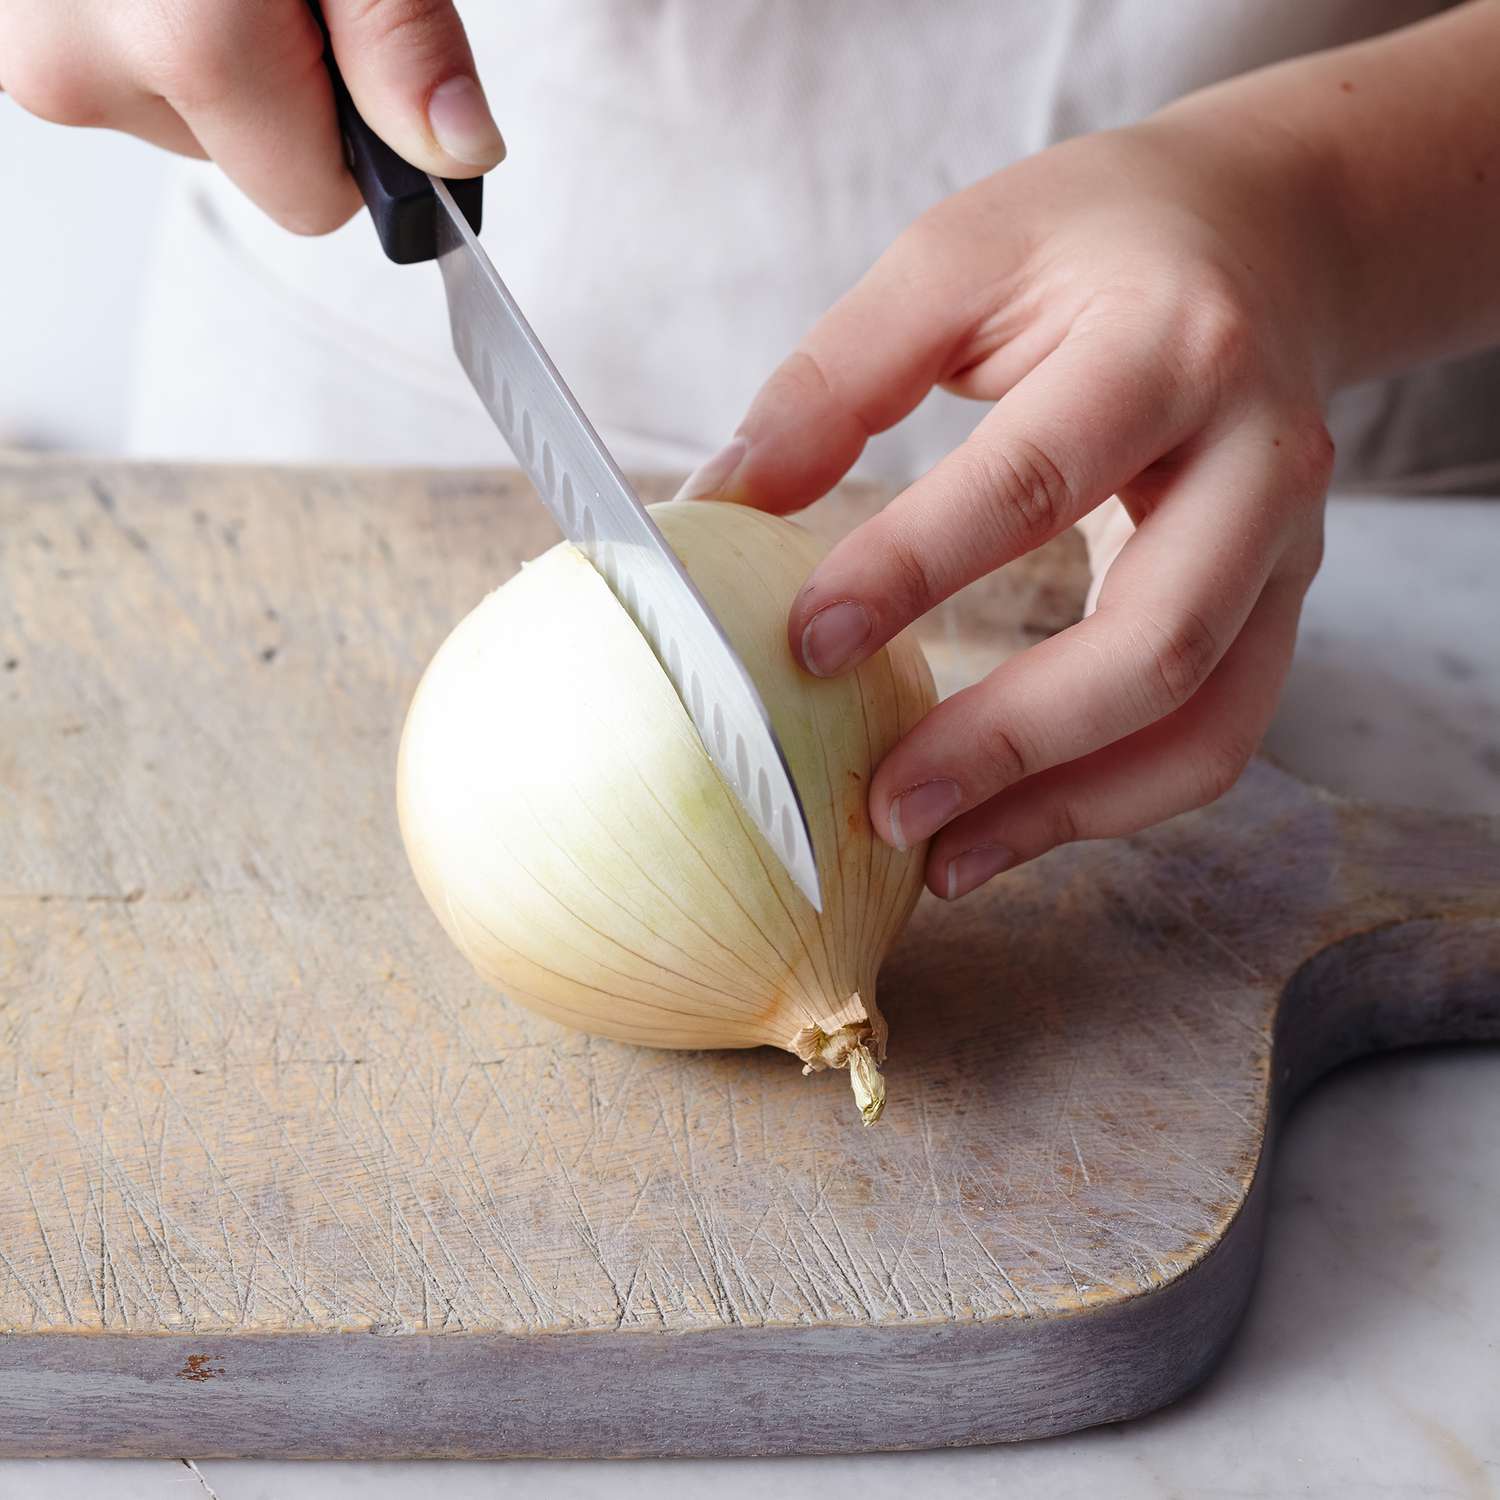 Midsection of woman cutting white onion on table